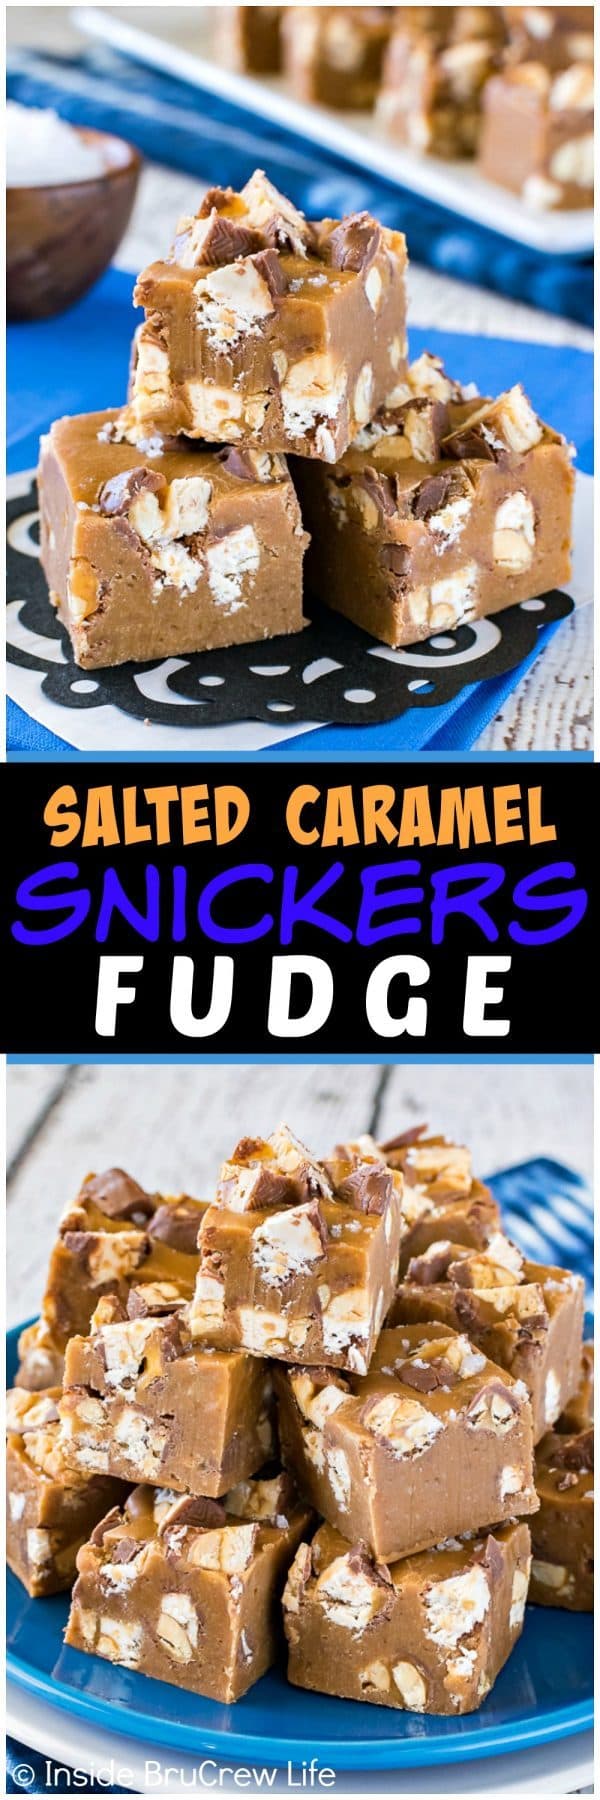 Salted Caramel Snickers Fudge - this easy caramel fudge is filled with Snickers candy bar chunks and sea salt. Great no bake recipe to calm your sweet and salty cravings!